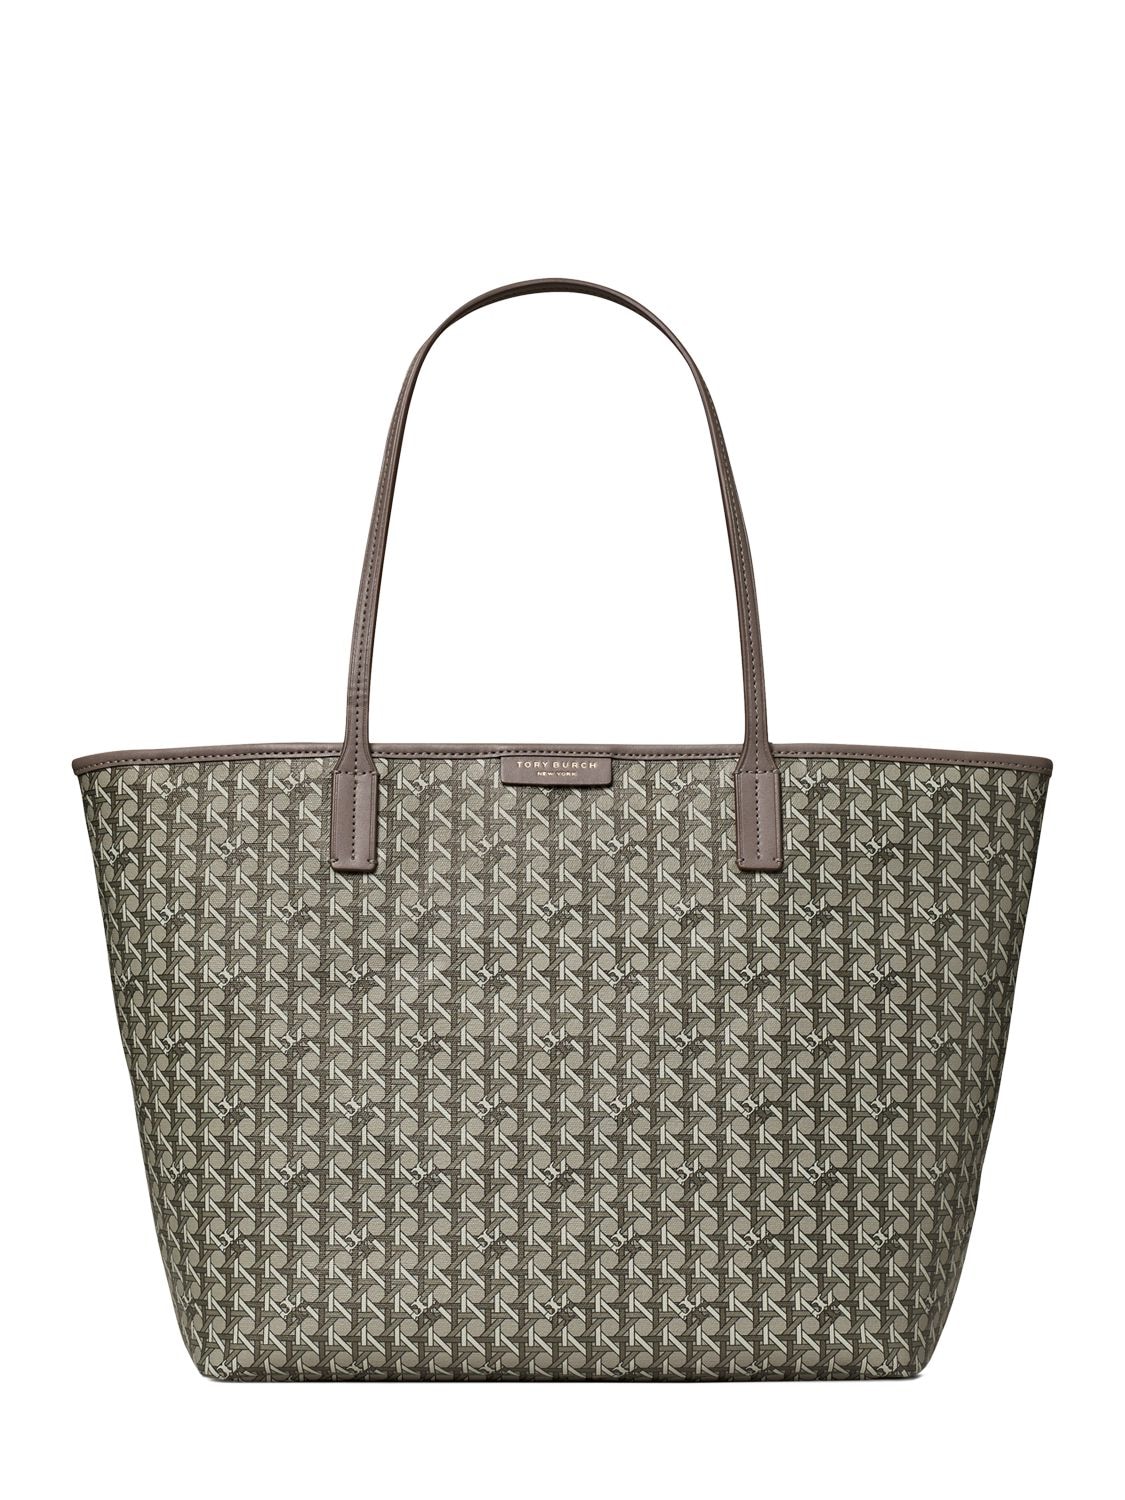 Tory Burch Small Coated Cotton Zip Tote Bag In Grey